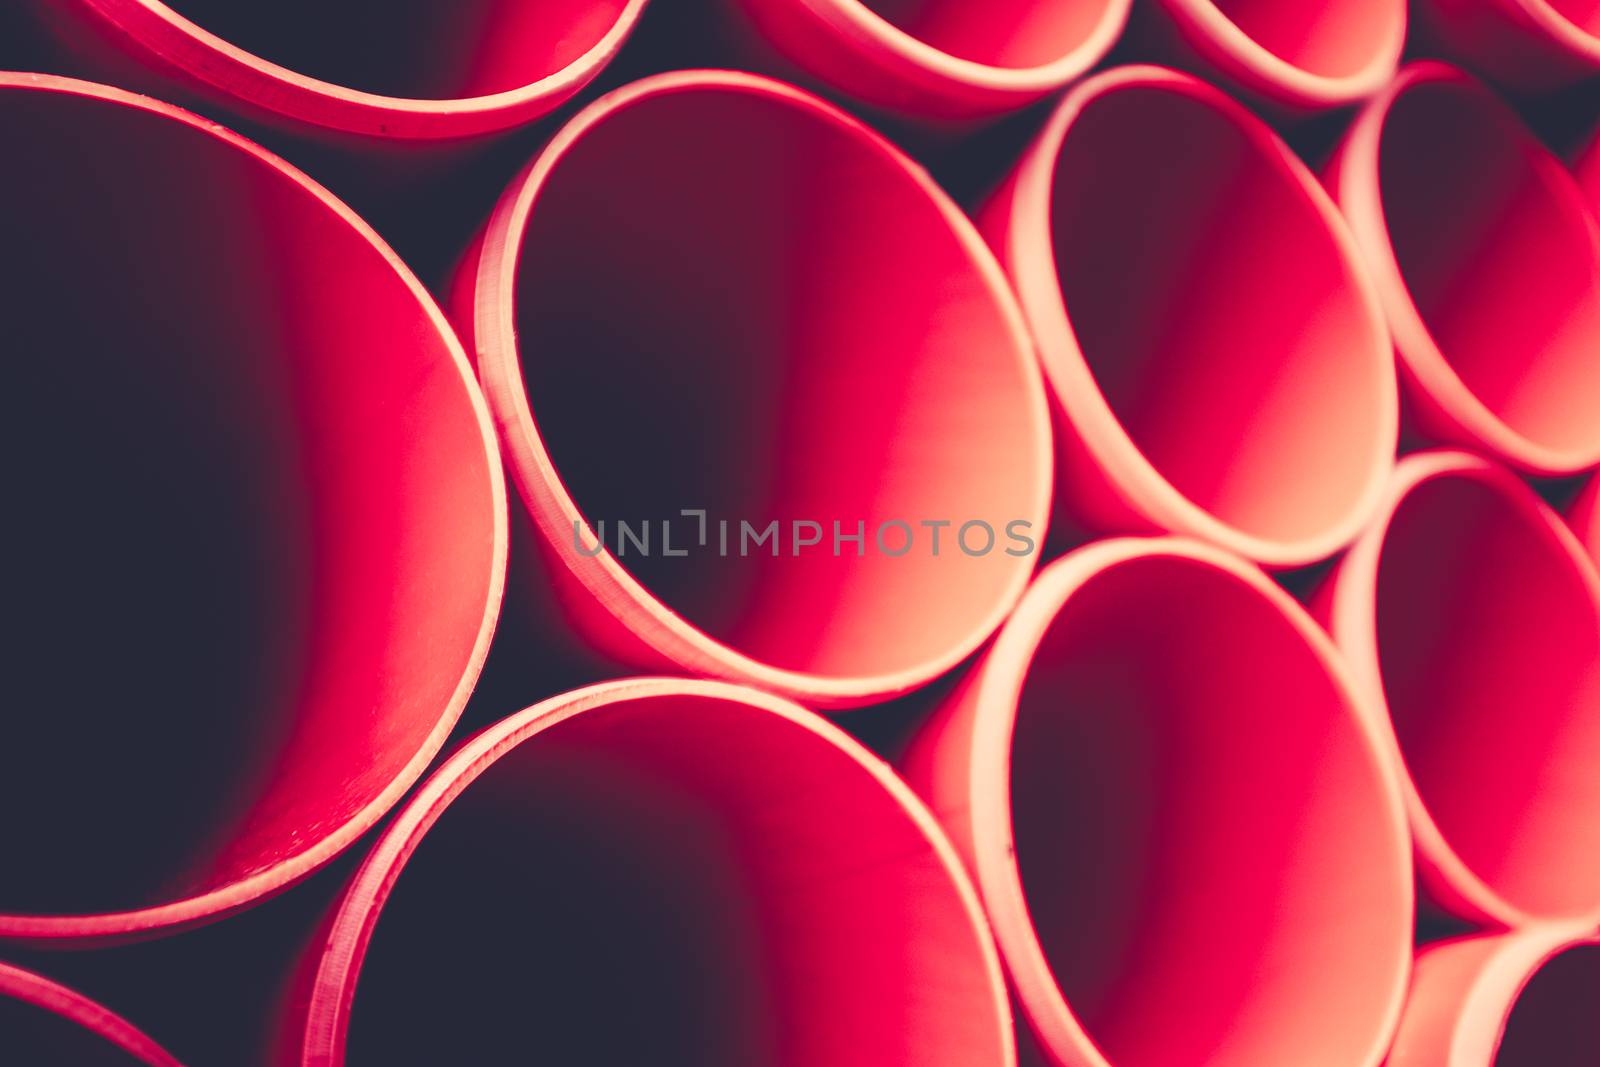 Abstract Background Of Plastic Tubes Or Pipes On A Construction Site